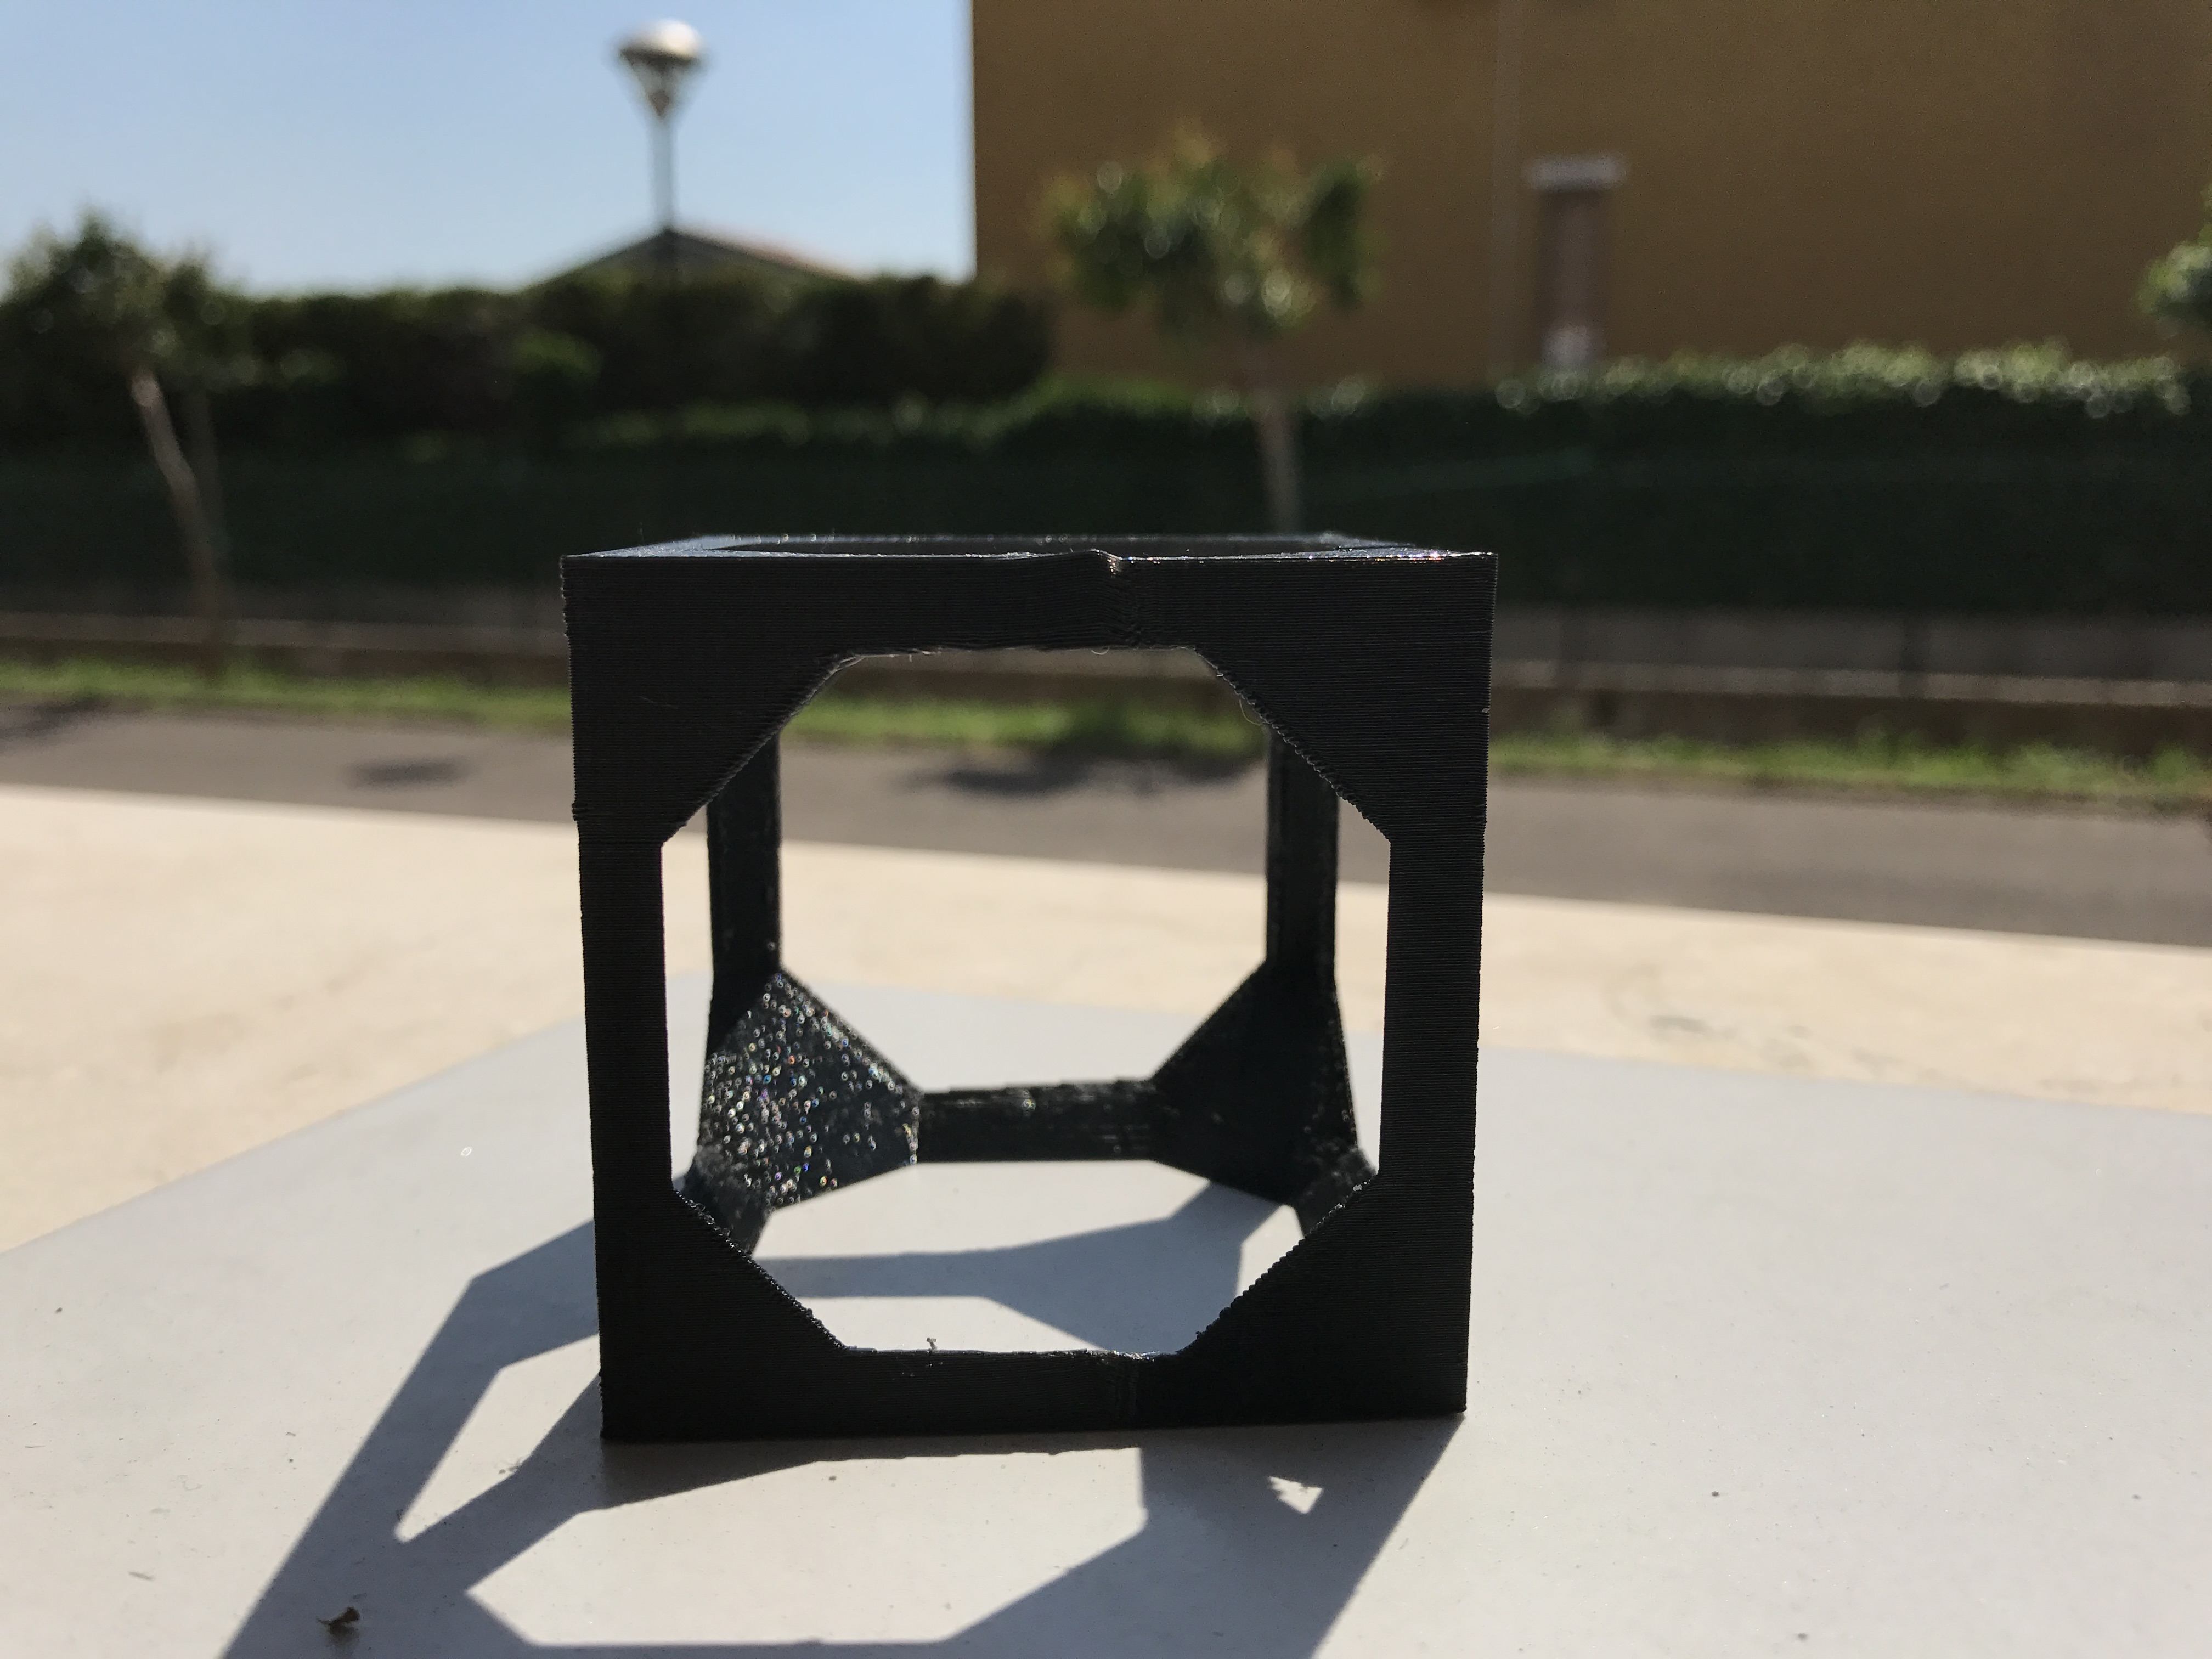 Hollow Cube image